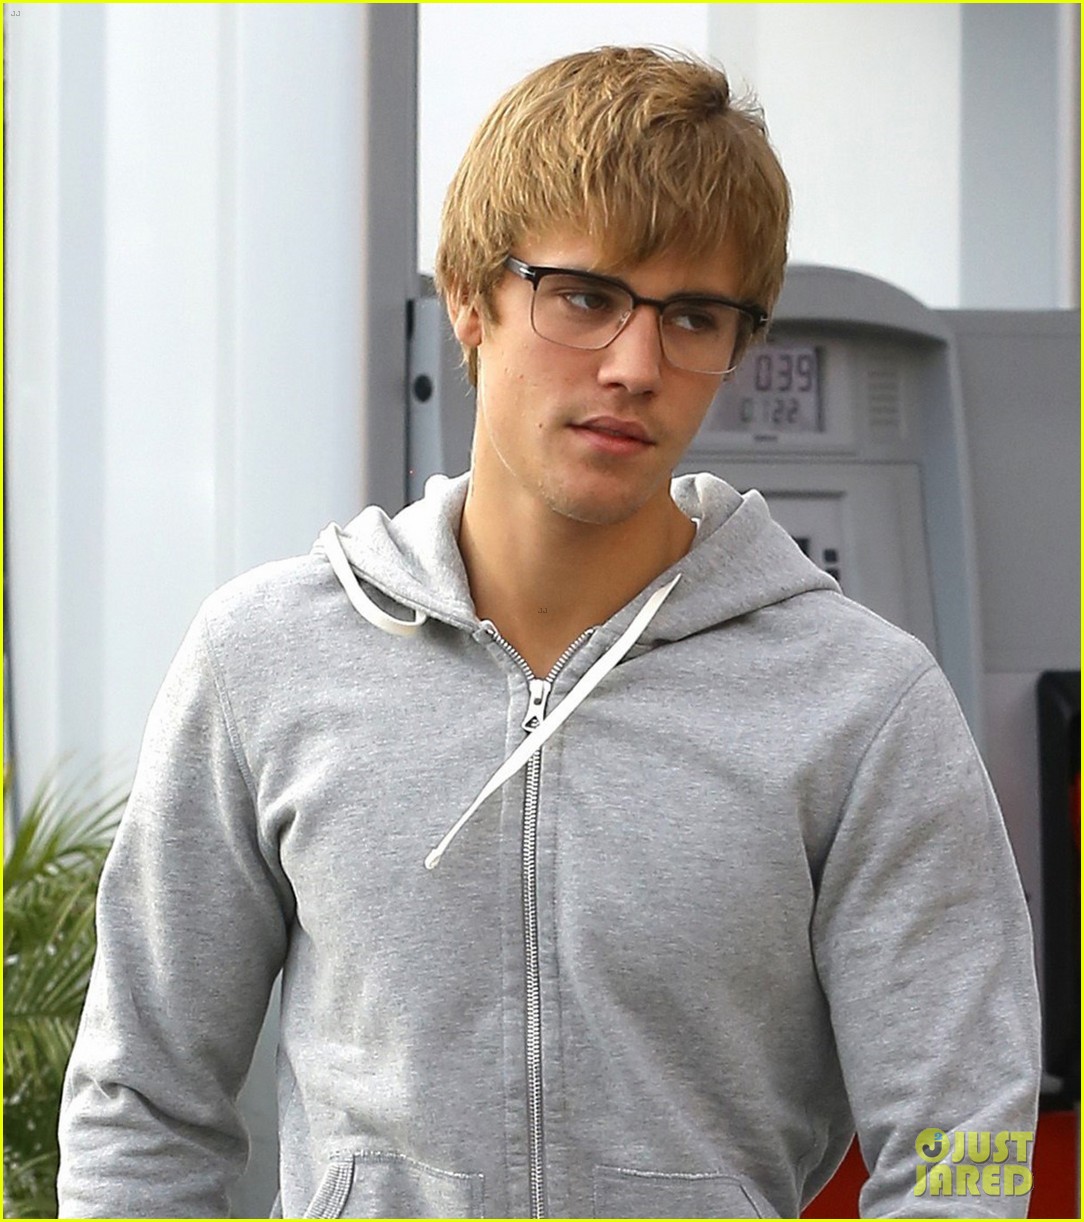 Velsigne auditorium kuvert Justin Bieber Gives the Camera a Swooning Stare Behind His Glasses: Photo  3844693 | Justin Bieber Pictures | Just Jared